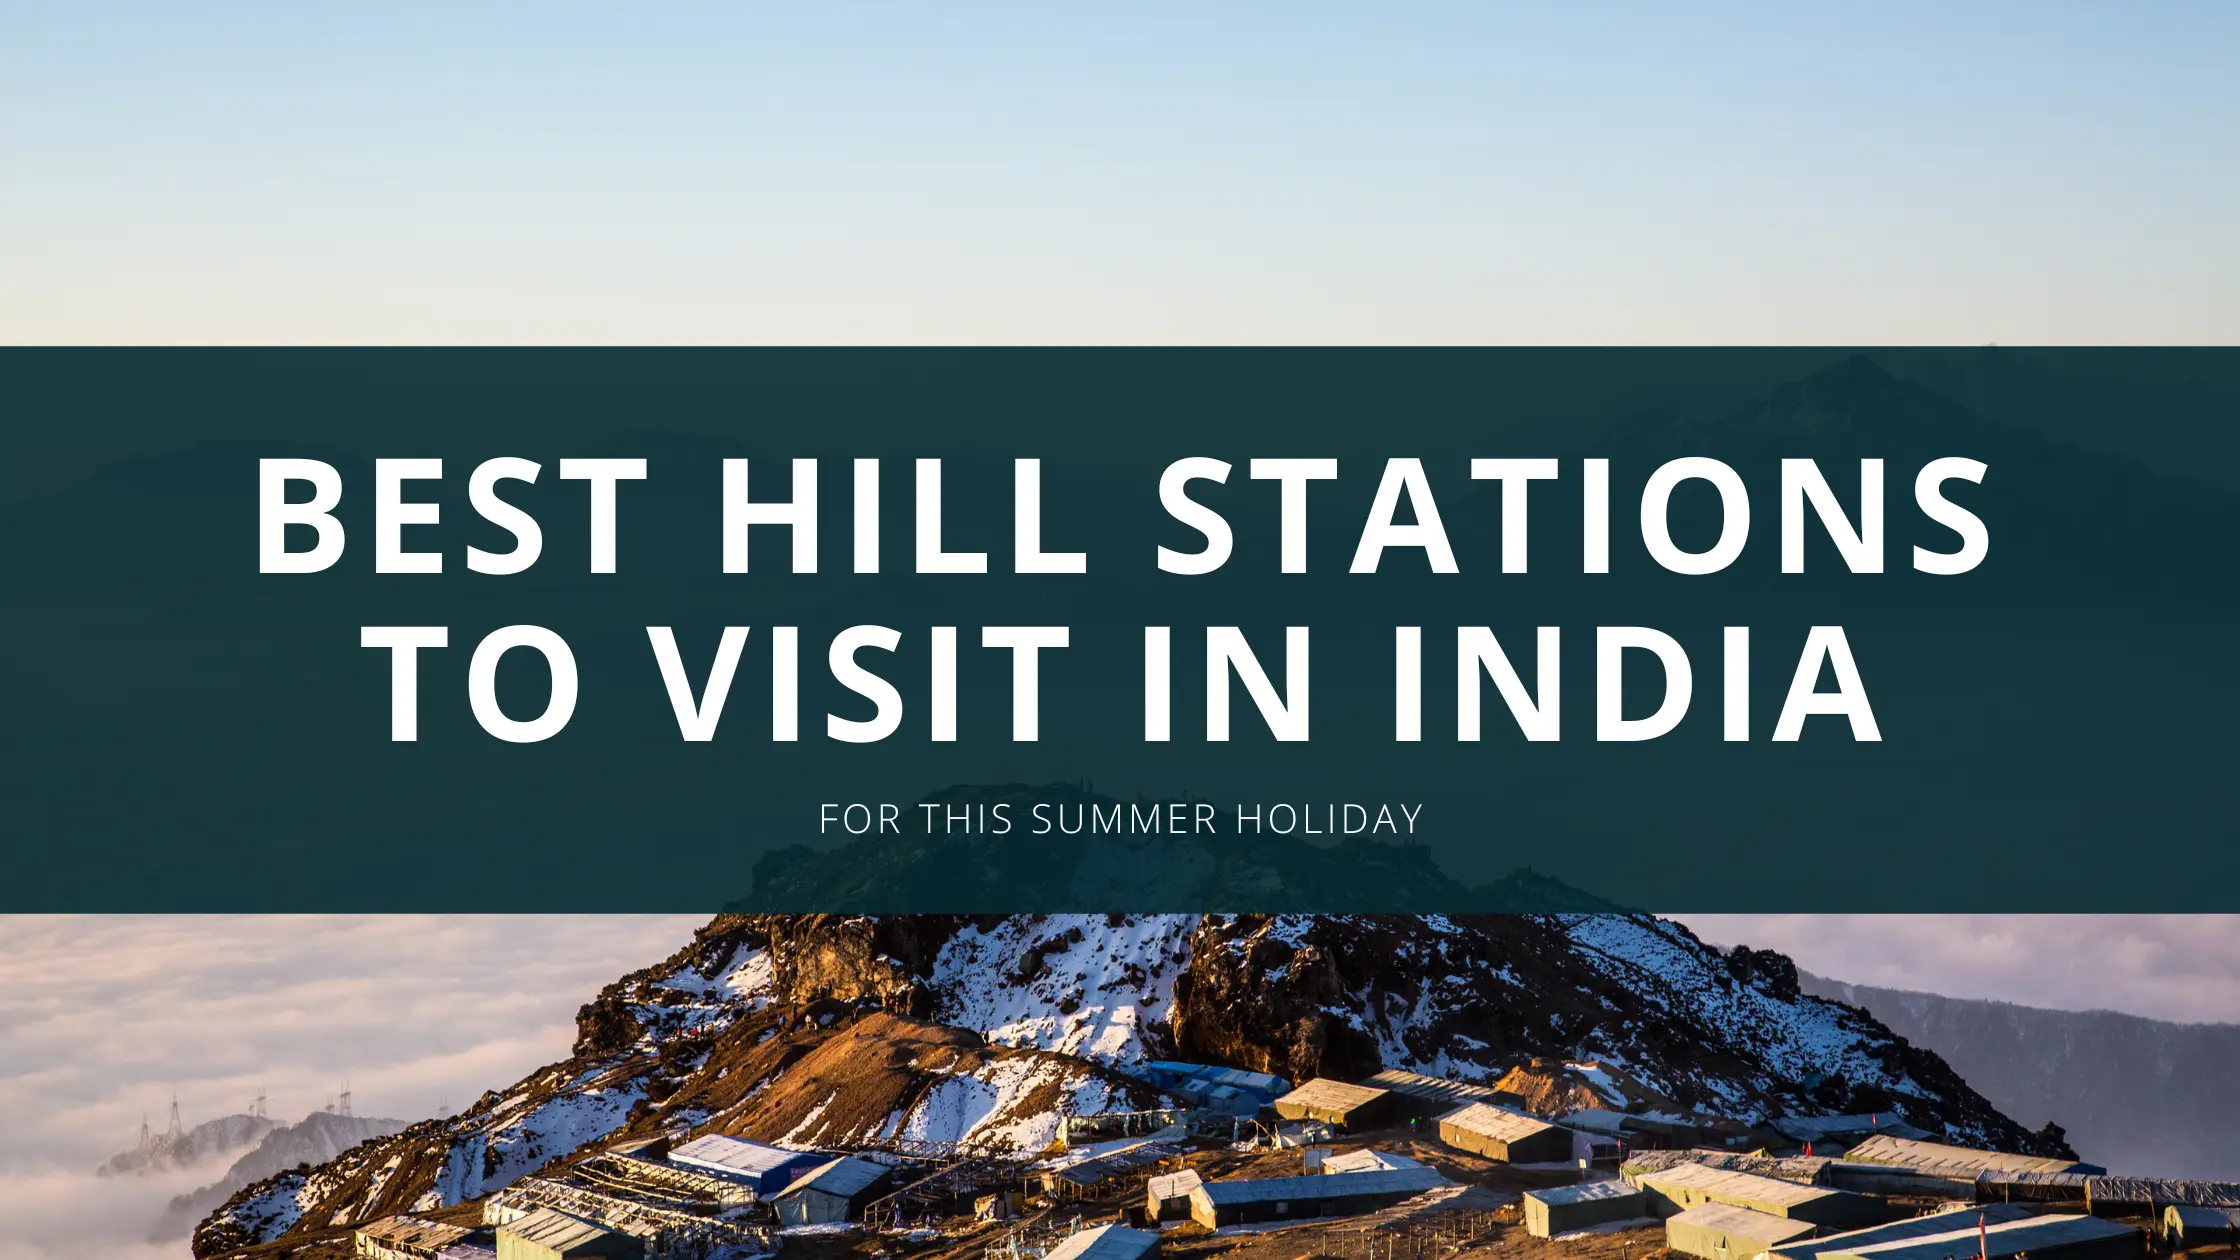 Best Hill Stations to Visit in India